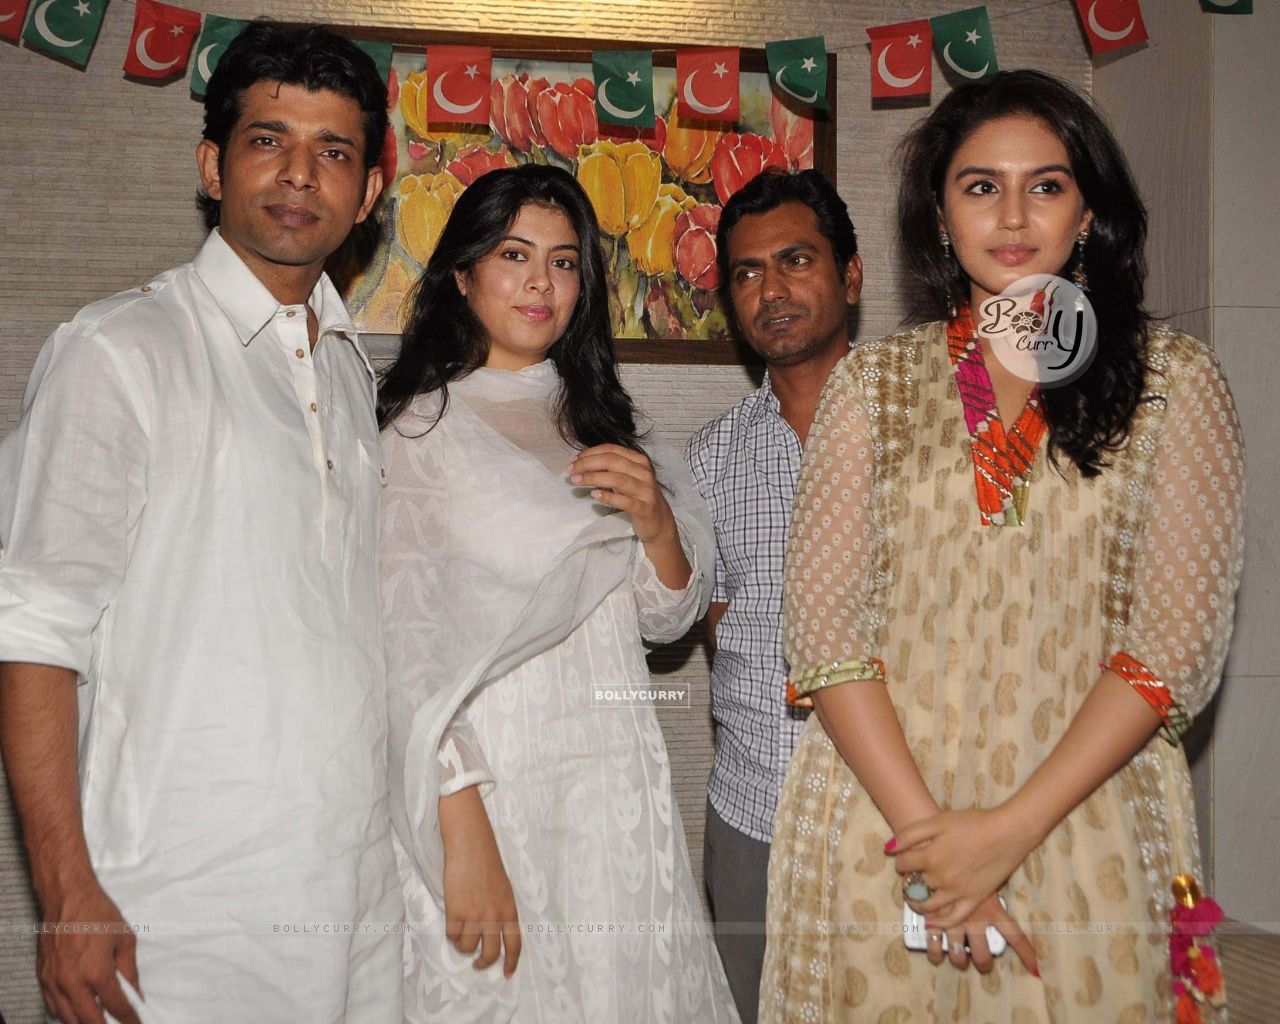 Wallpaper of Gangs of Wasseypur at a Iftar party